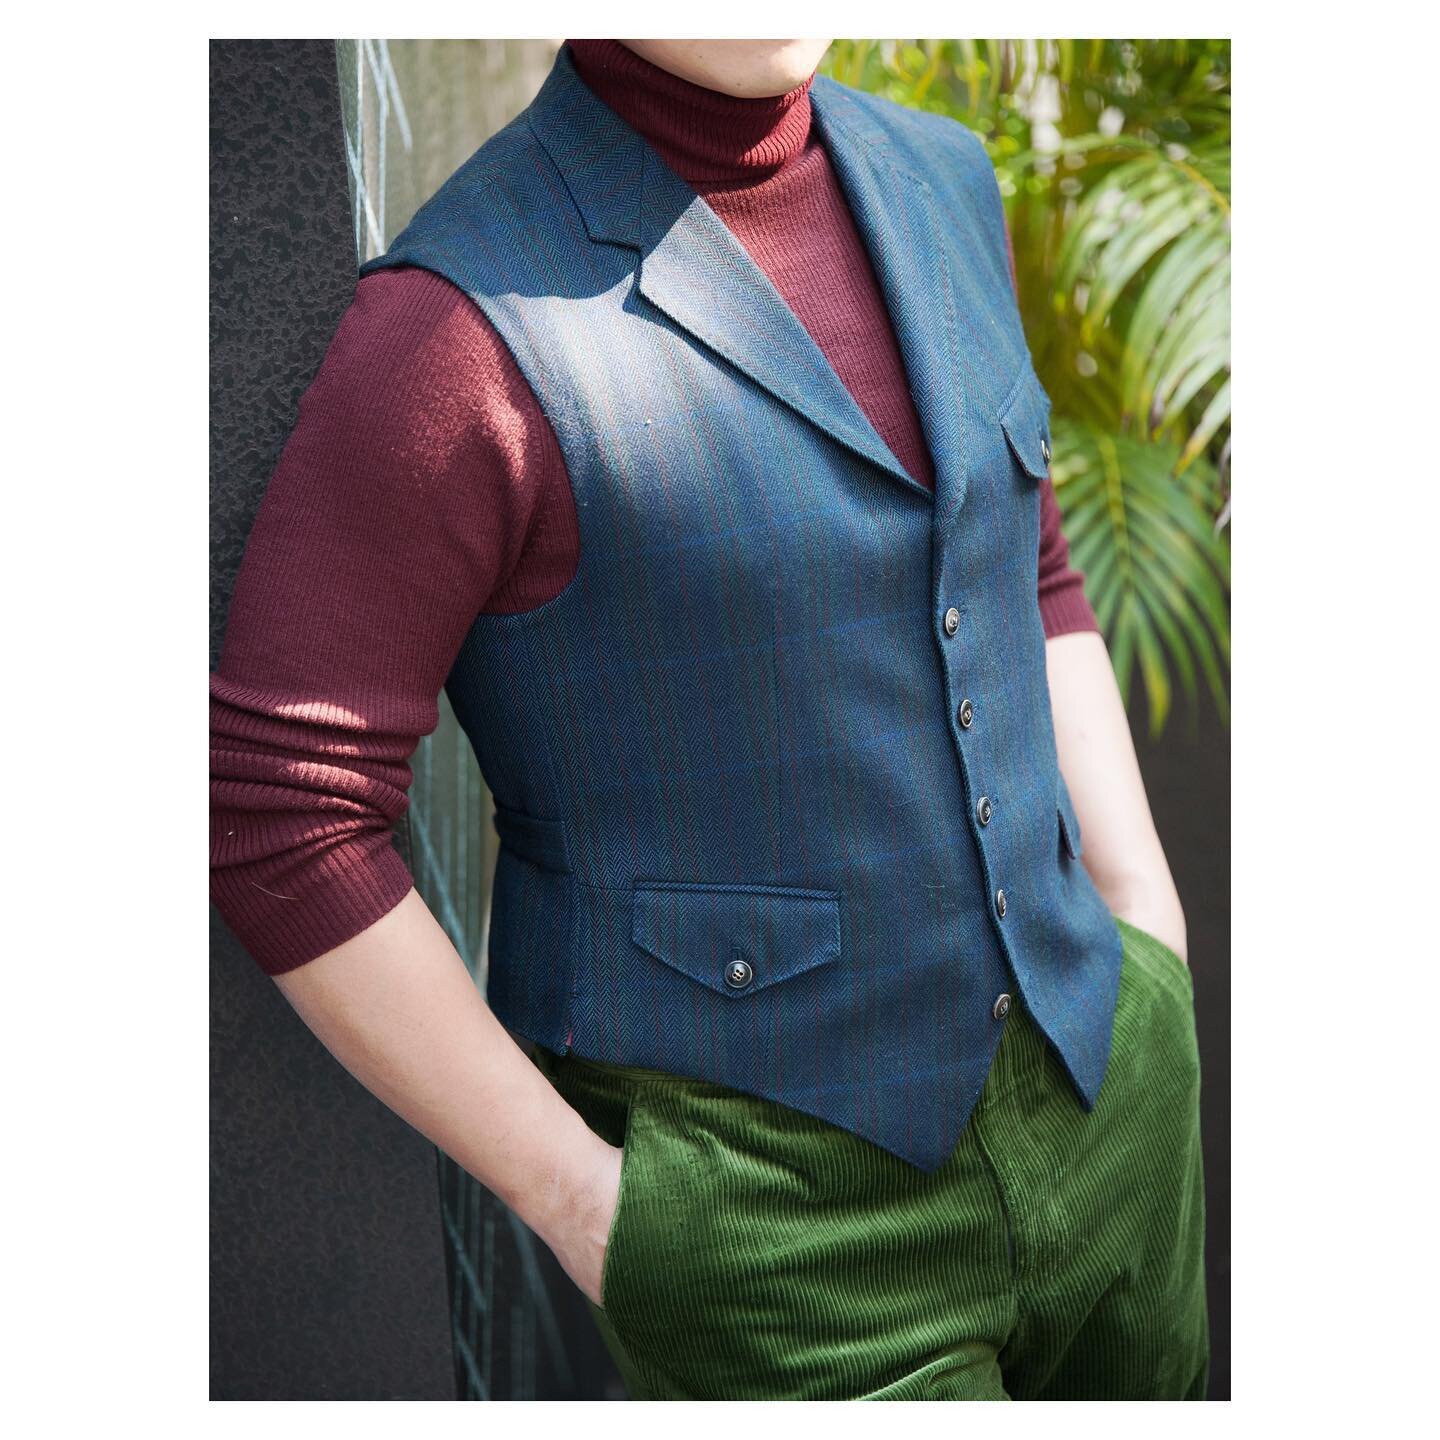 Our signature waistcoat style features the genuine lapels with a back collar, self fabric back and an exaggerated pointy hem, all combining to highlight men&rsquo;s physique and making it a great alternative to wearing a sports jacket when the weathe